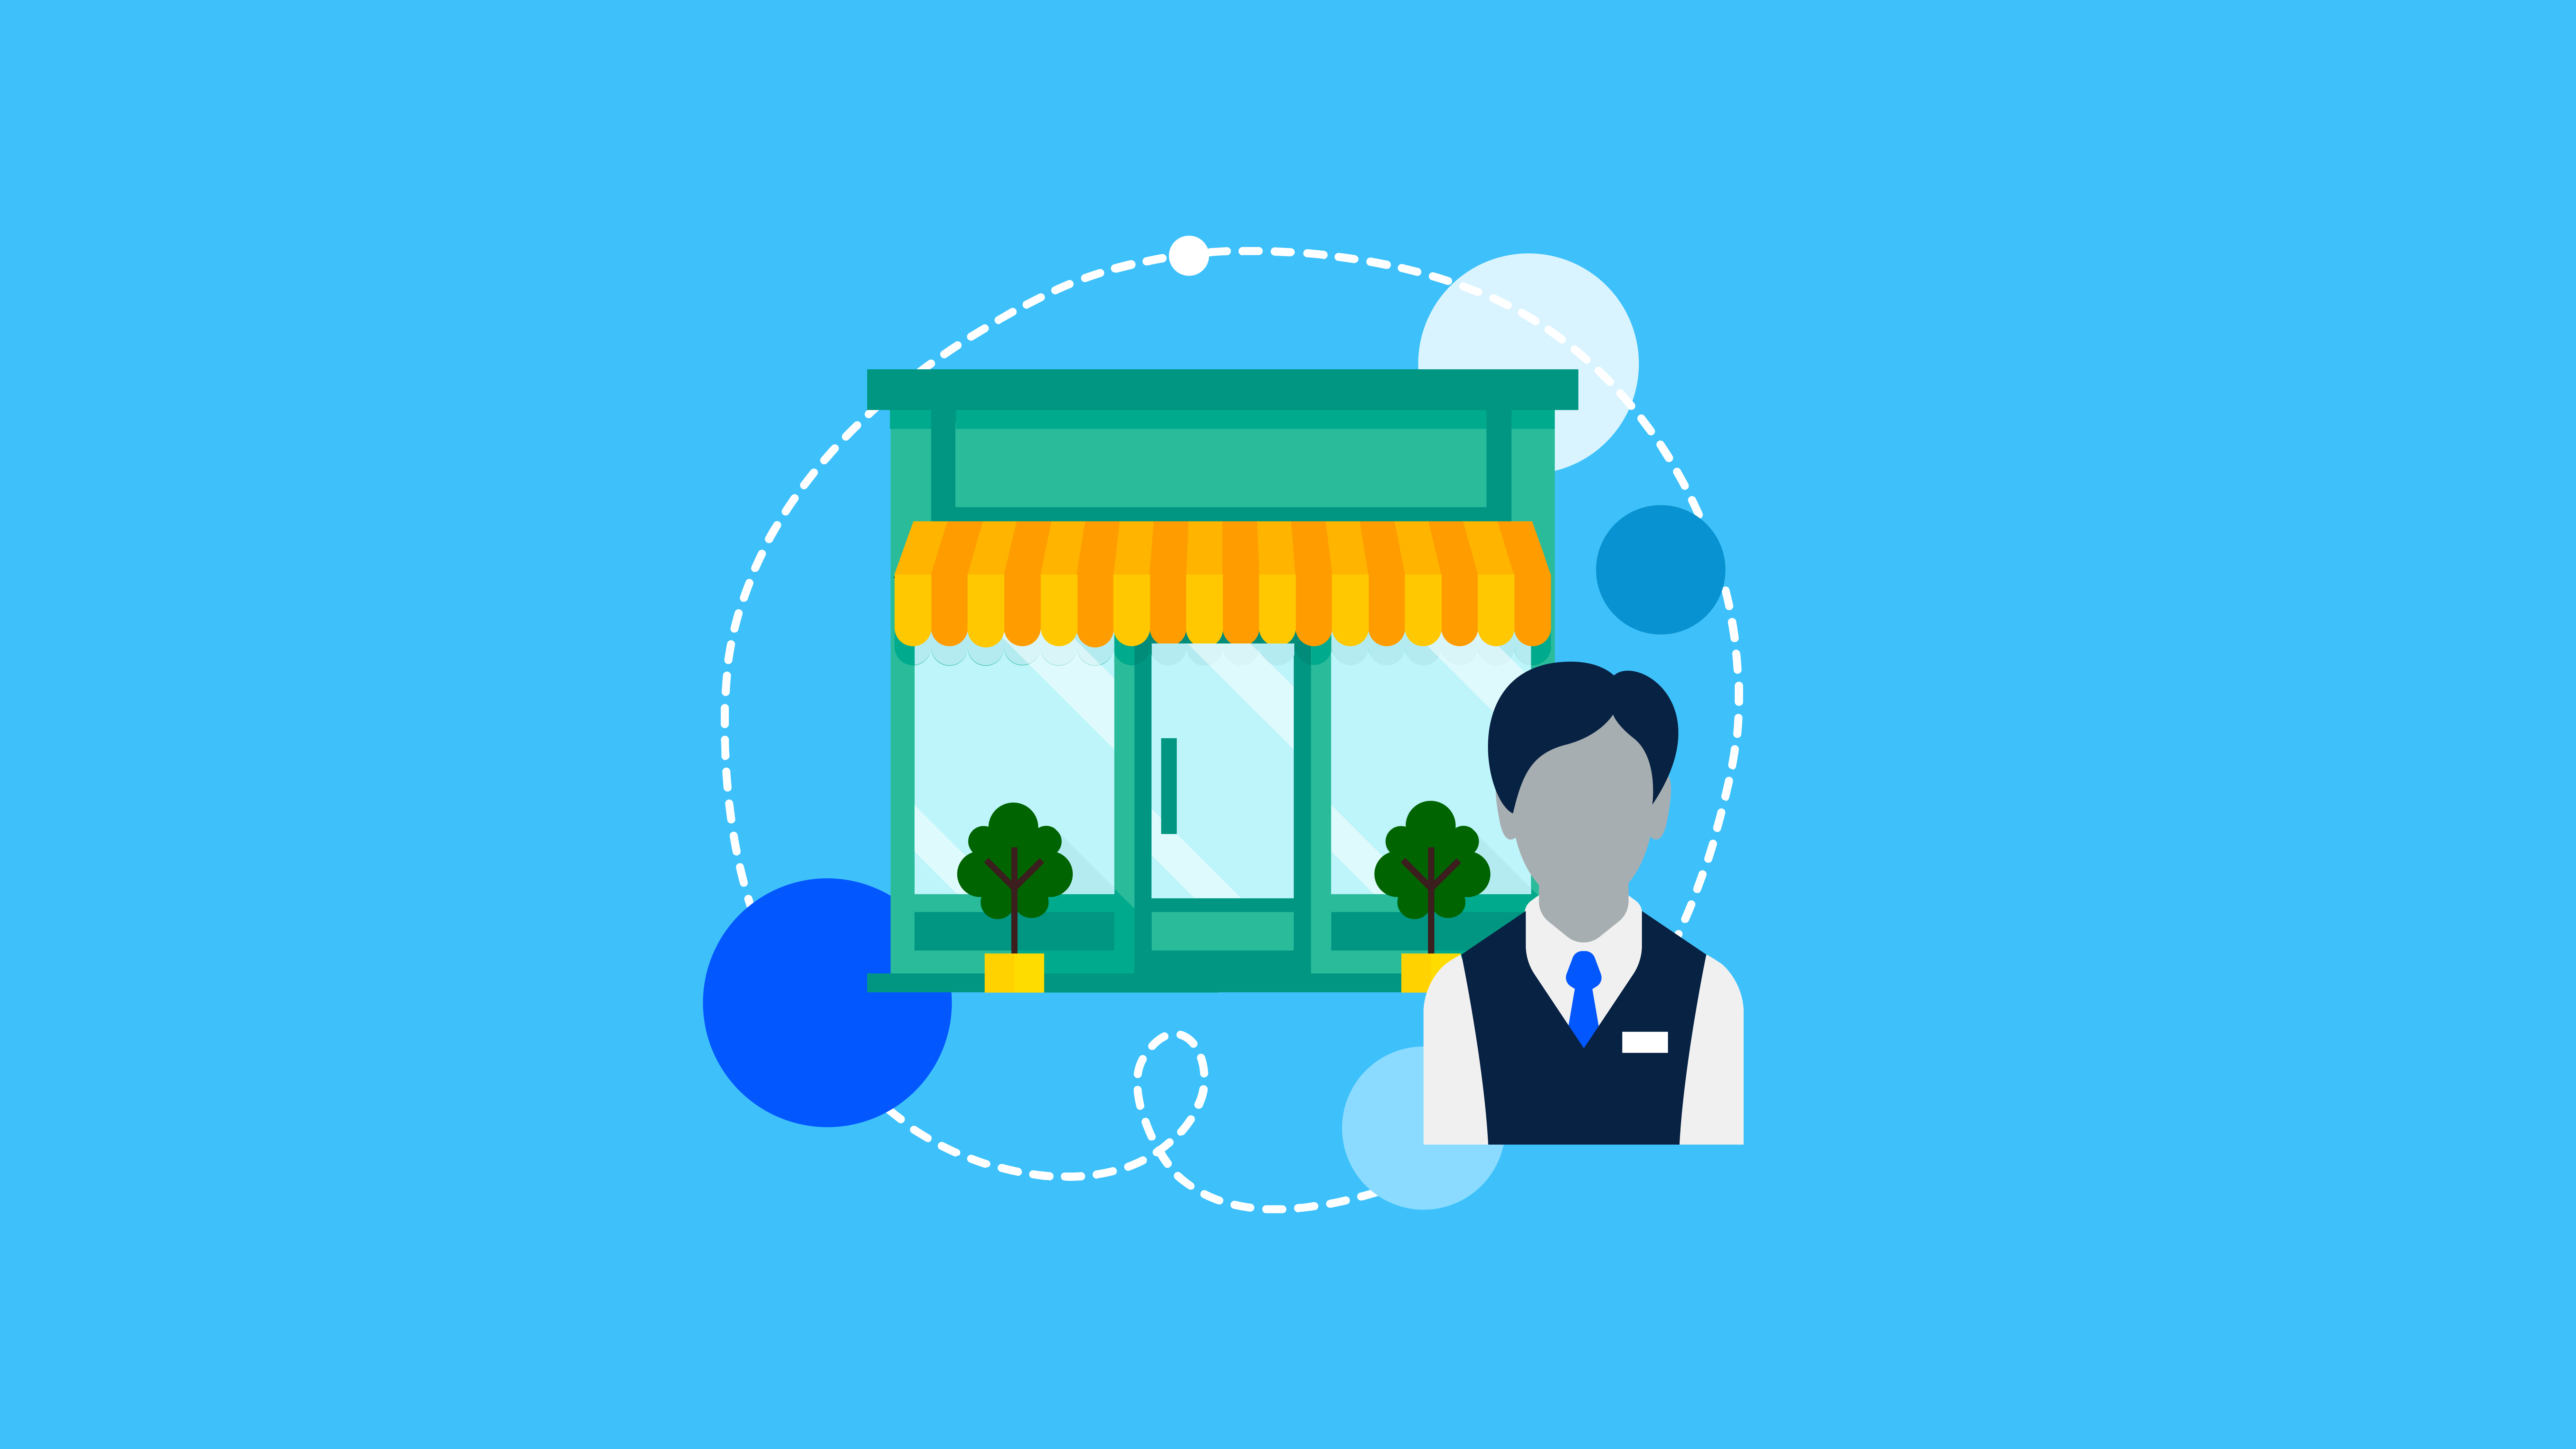 Illustration of a small business storefront and a business owner.